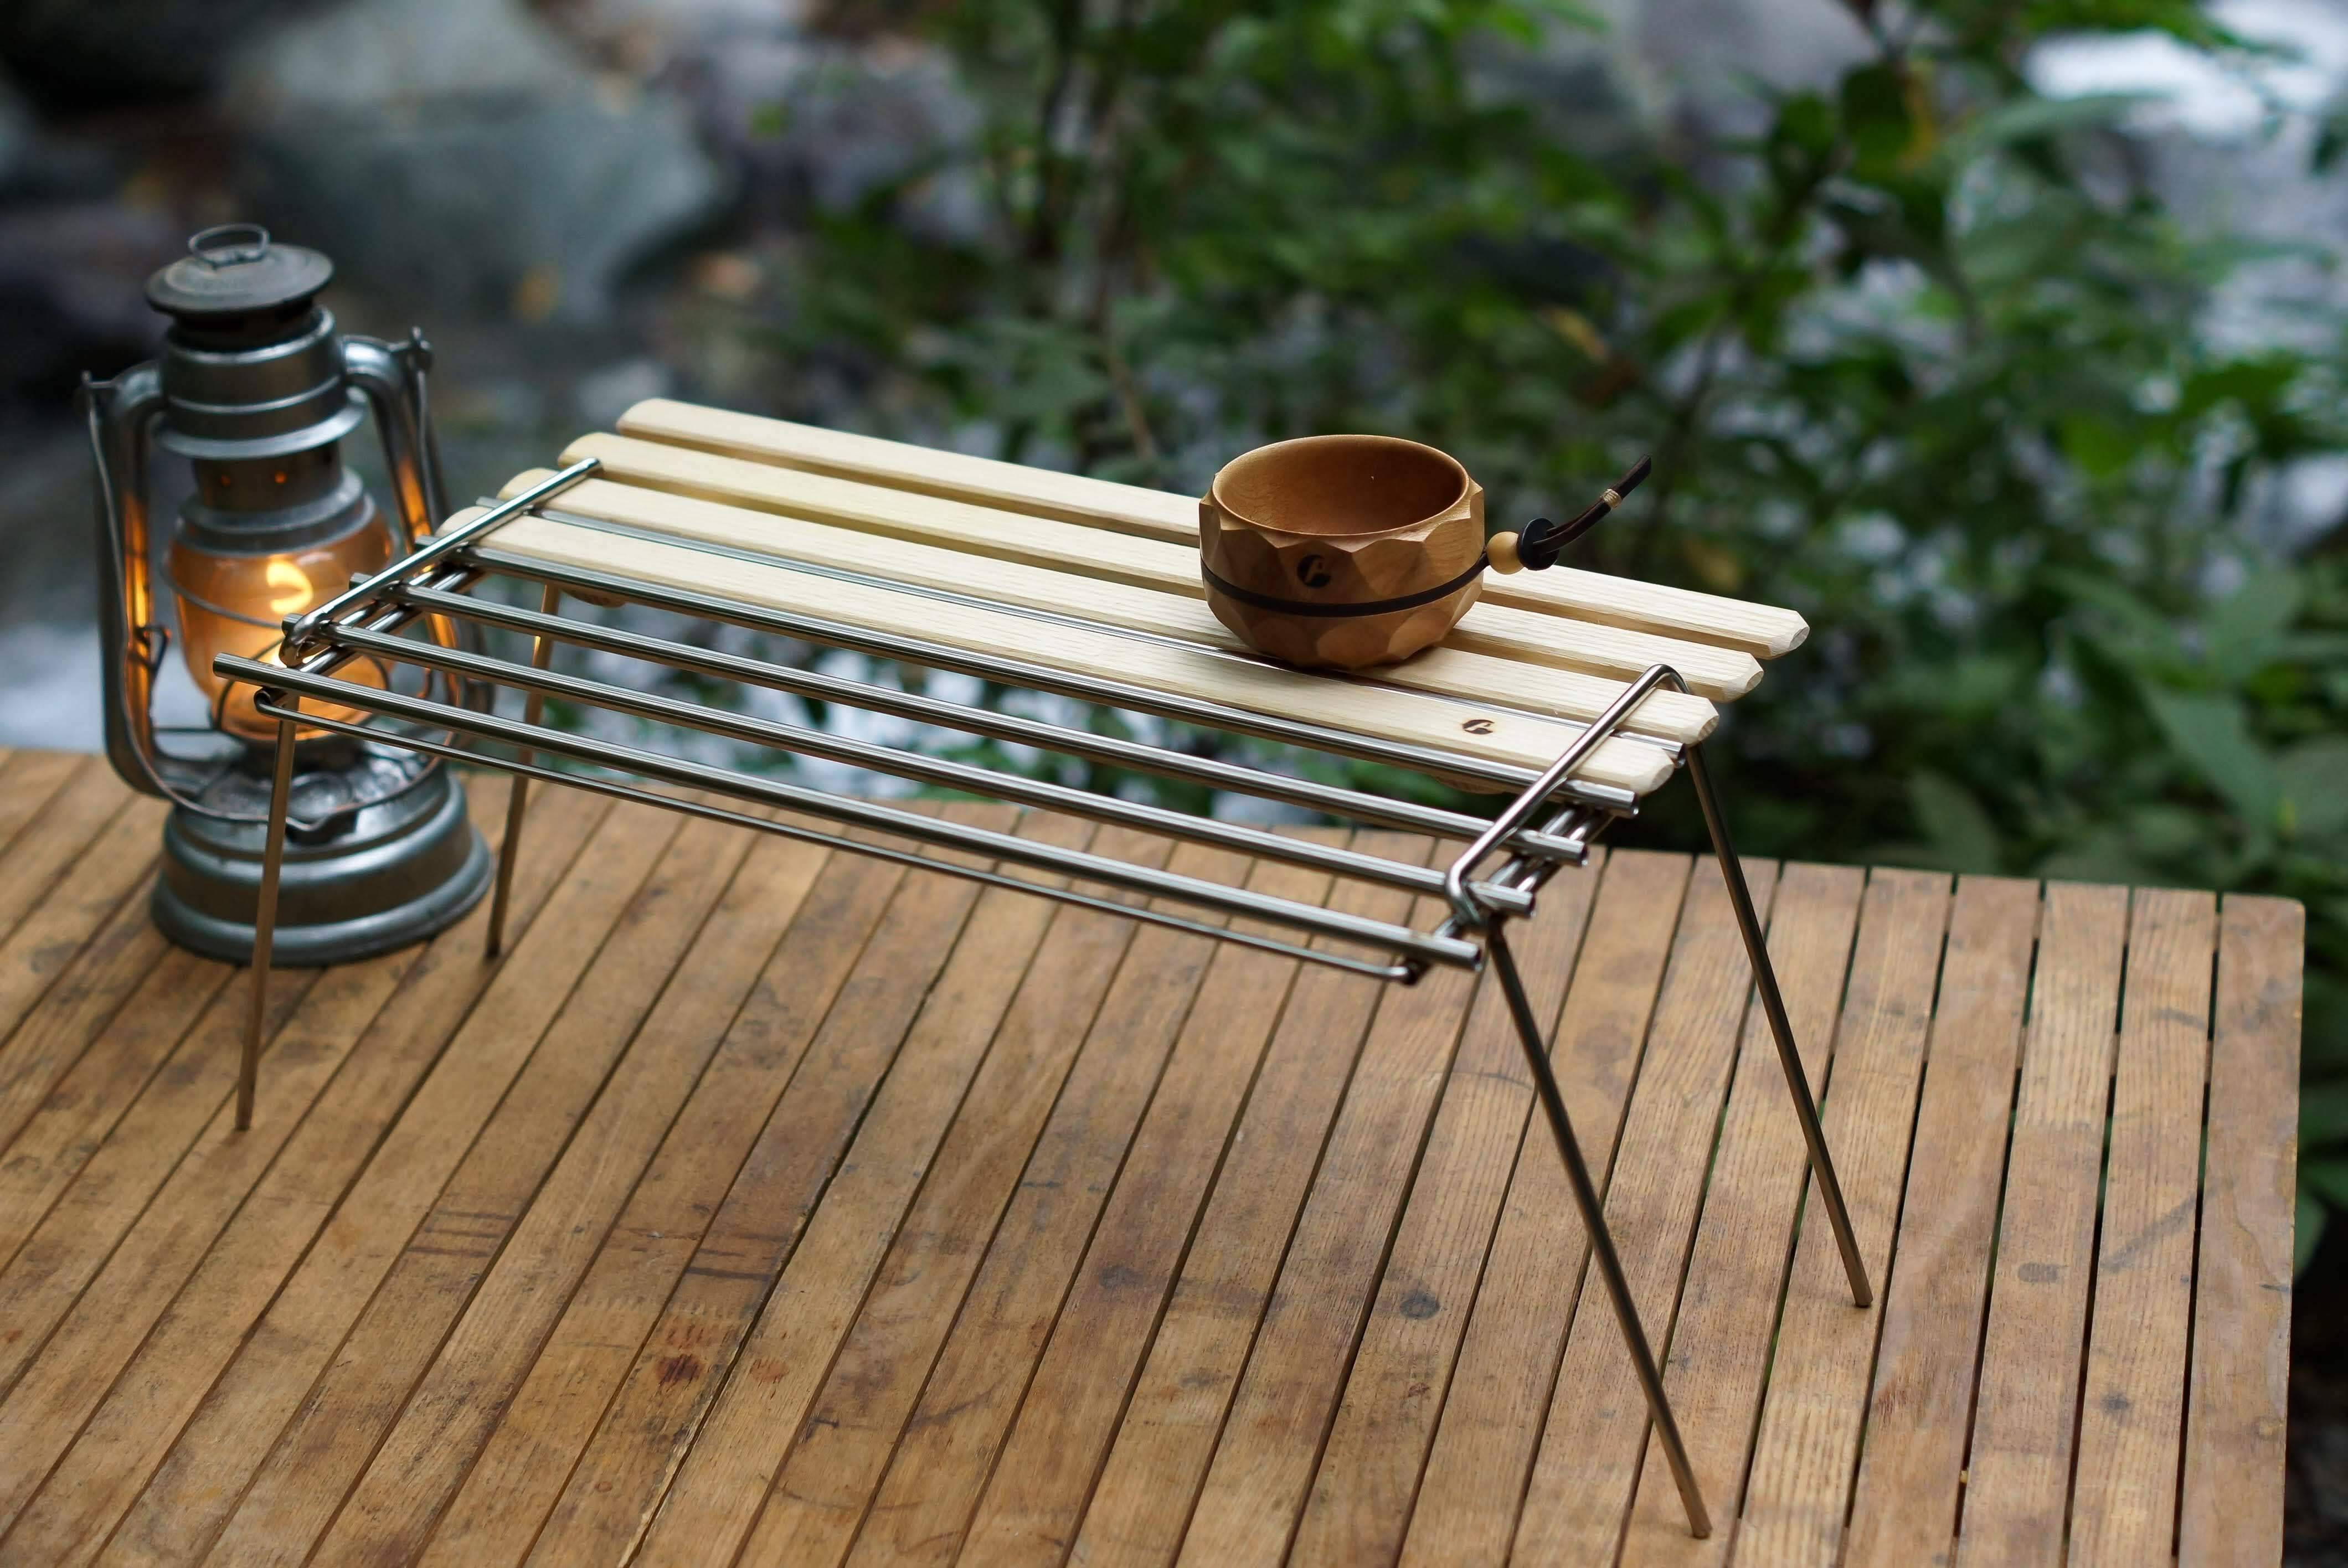 Asimocrafts A38 Grate table 枯葉／迷彩款